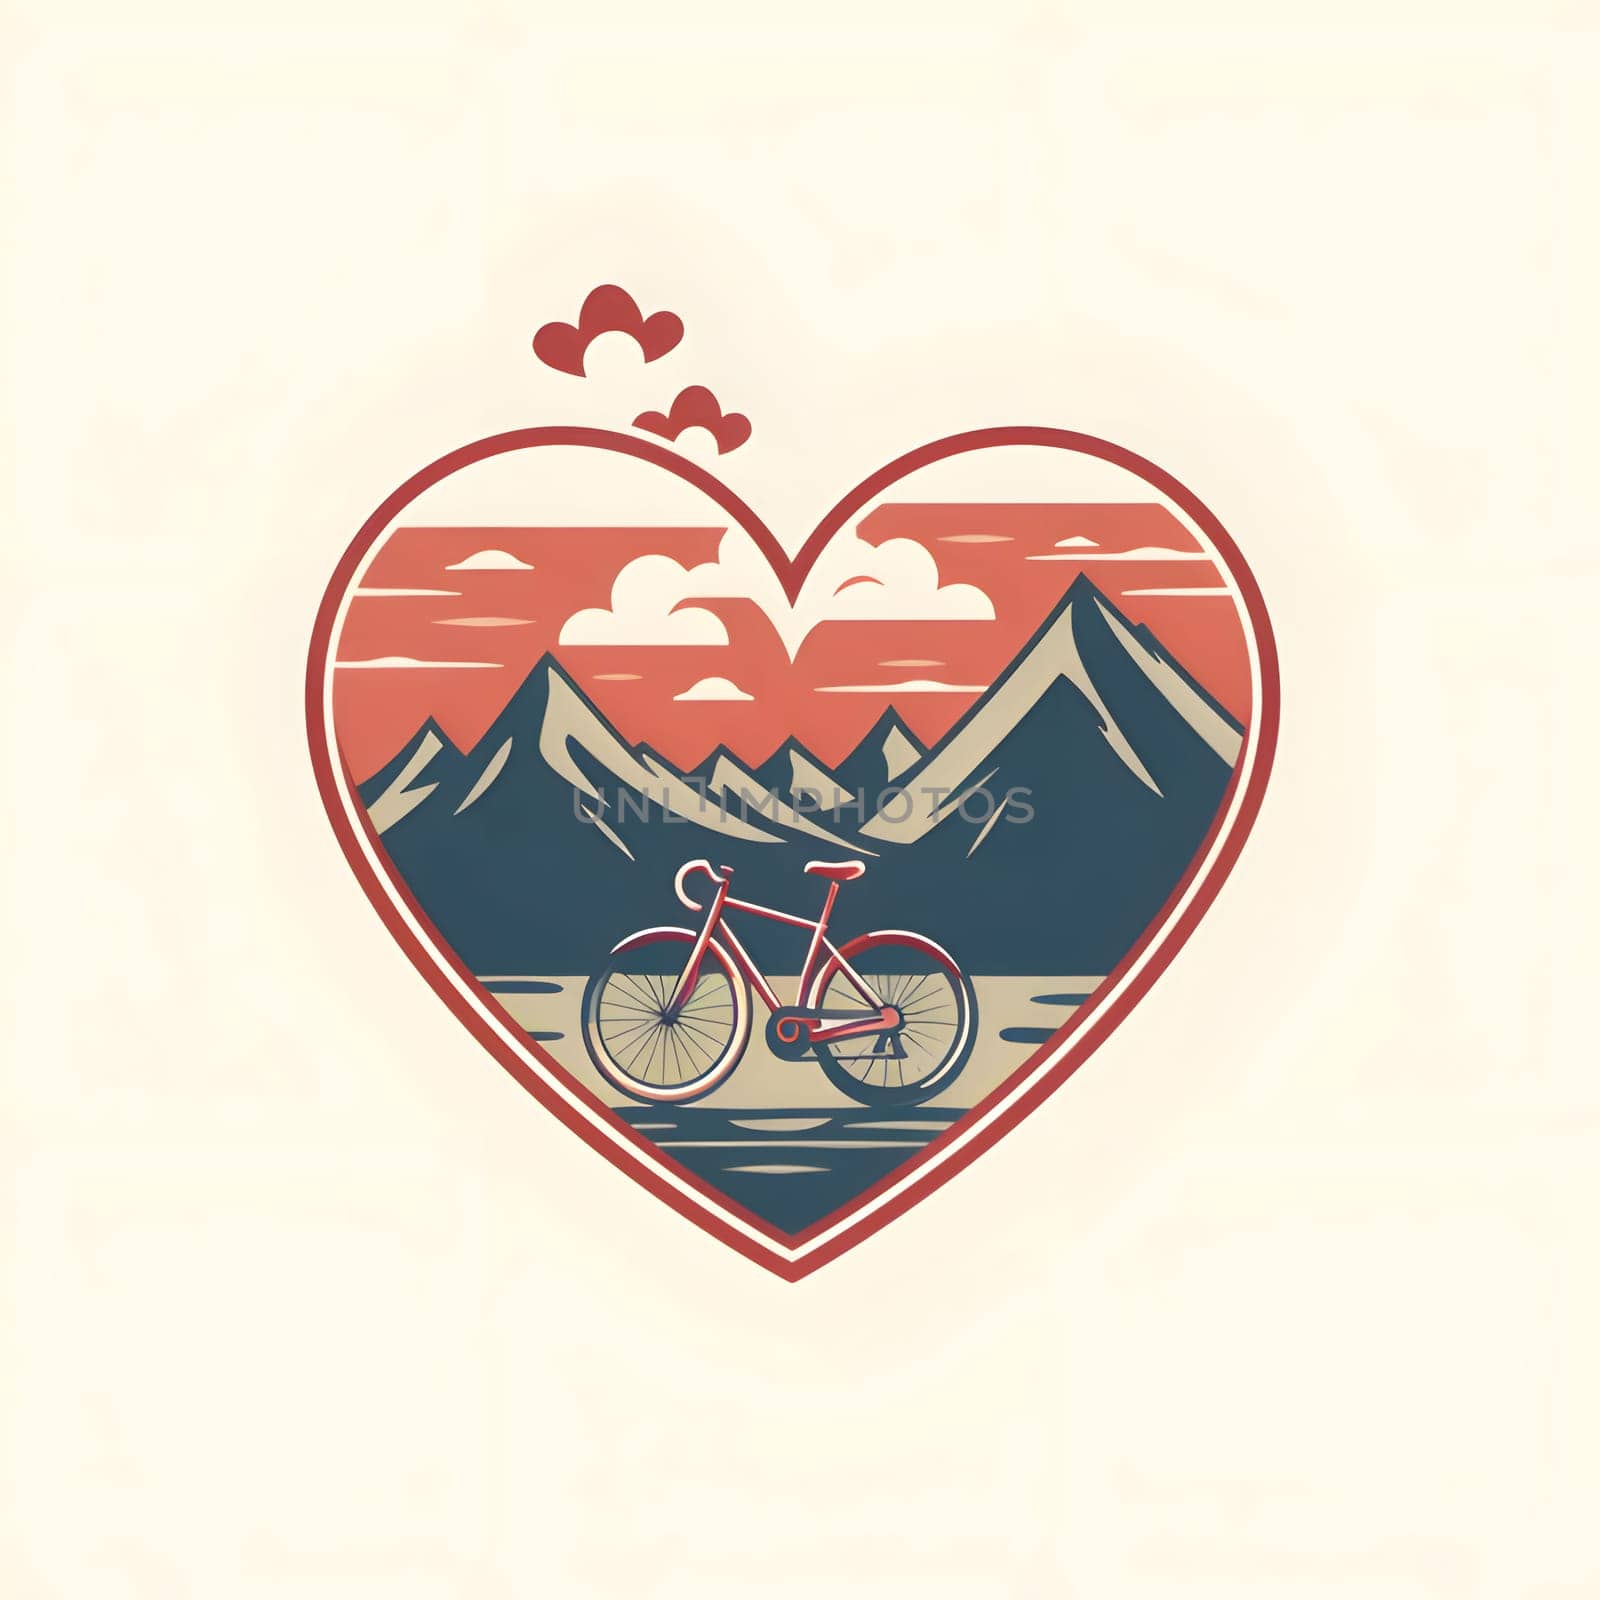 Logo concept heart in it mountains clouds, bicycle. Heart as a symbol of affection and love. by ThemesS